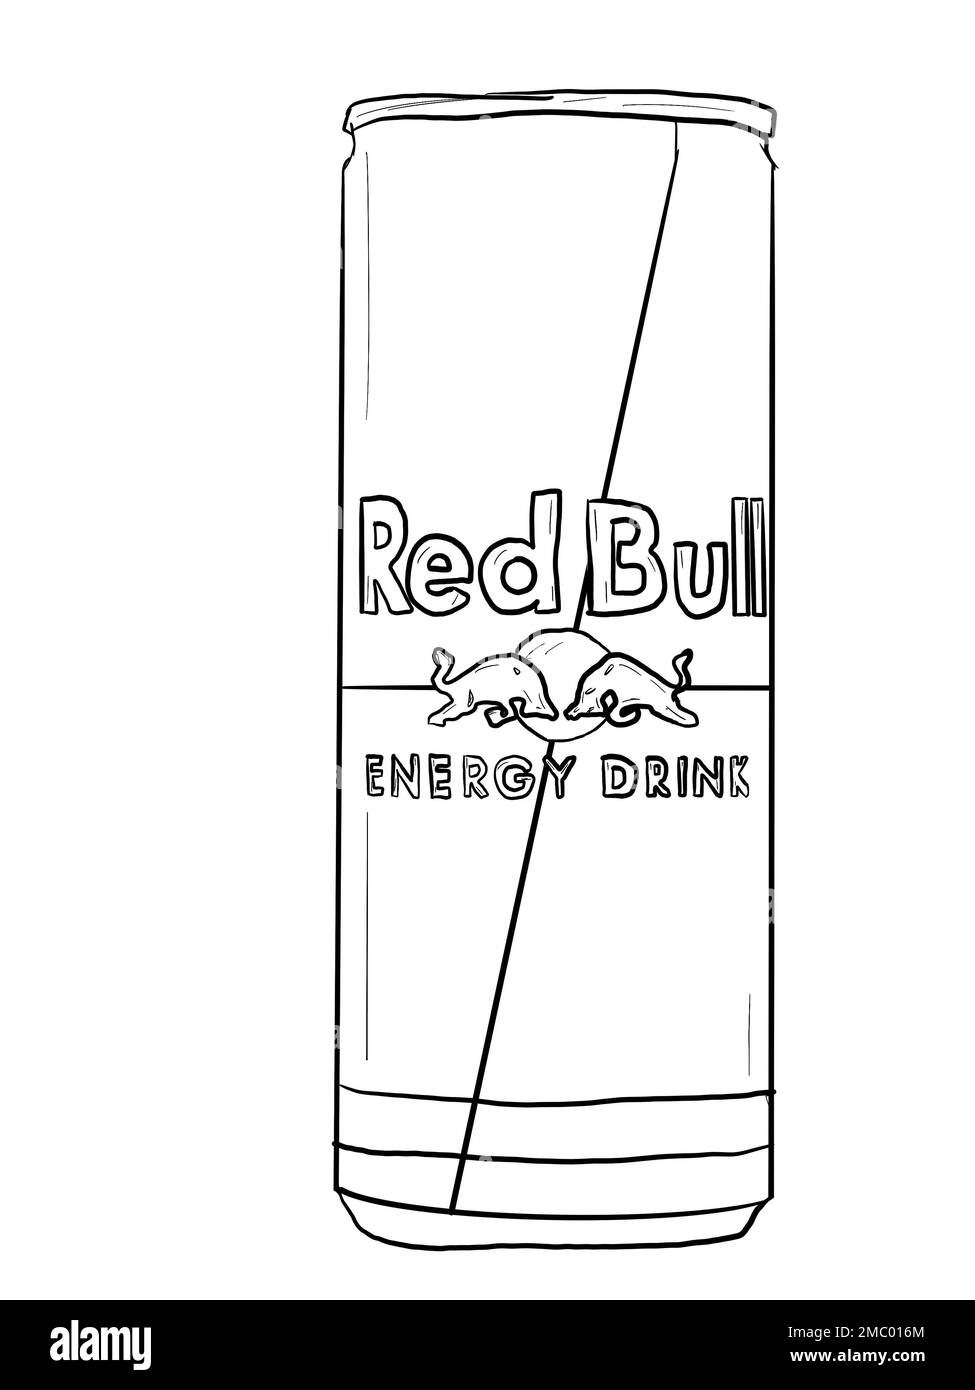 Red Bull Graphik Style Stock Photo